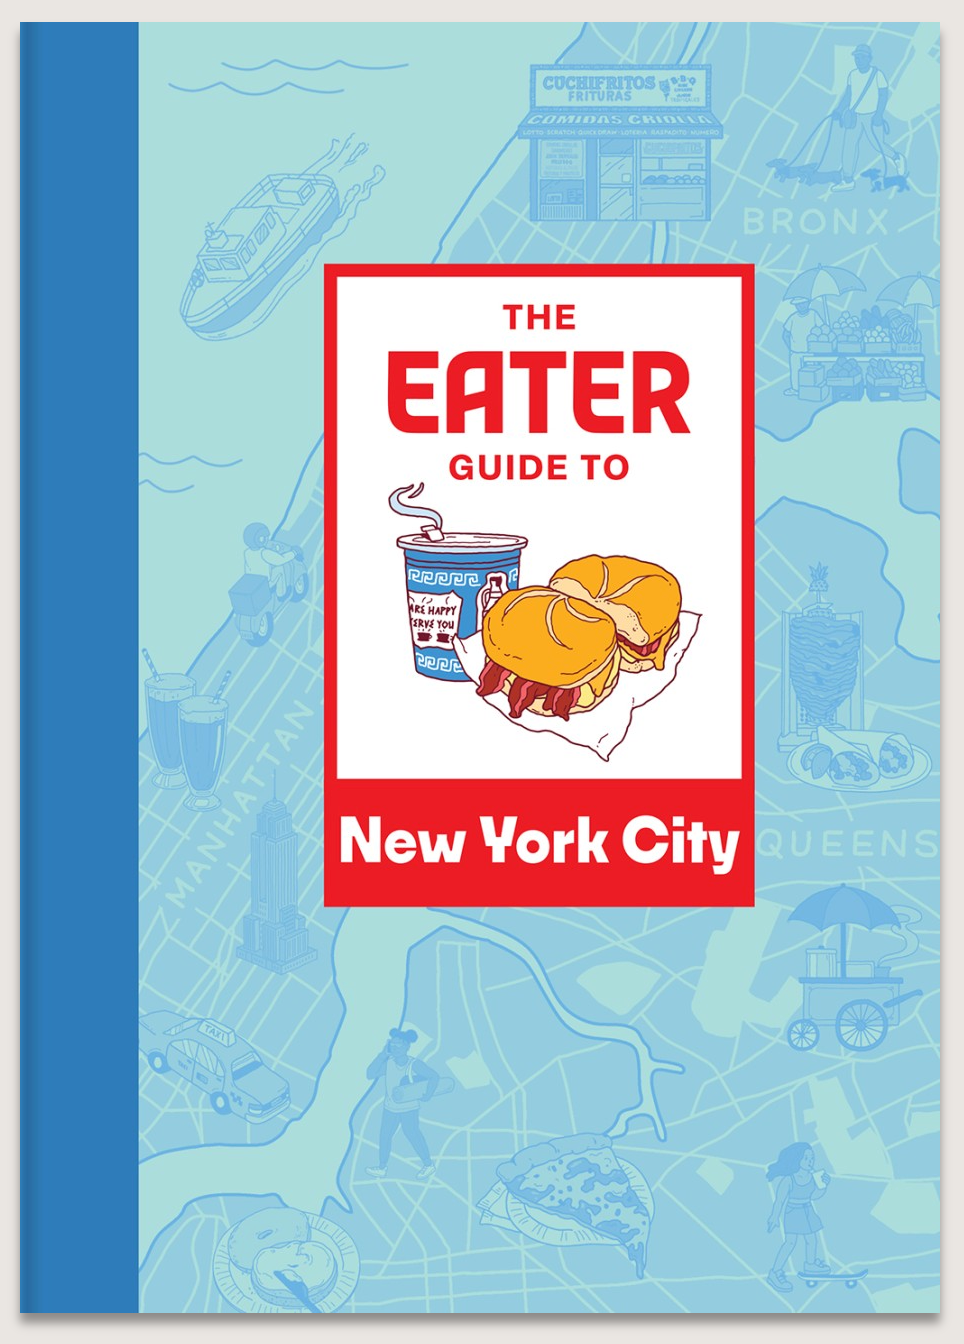 The Eater Guide to New York